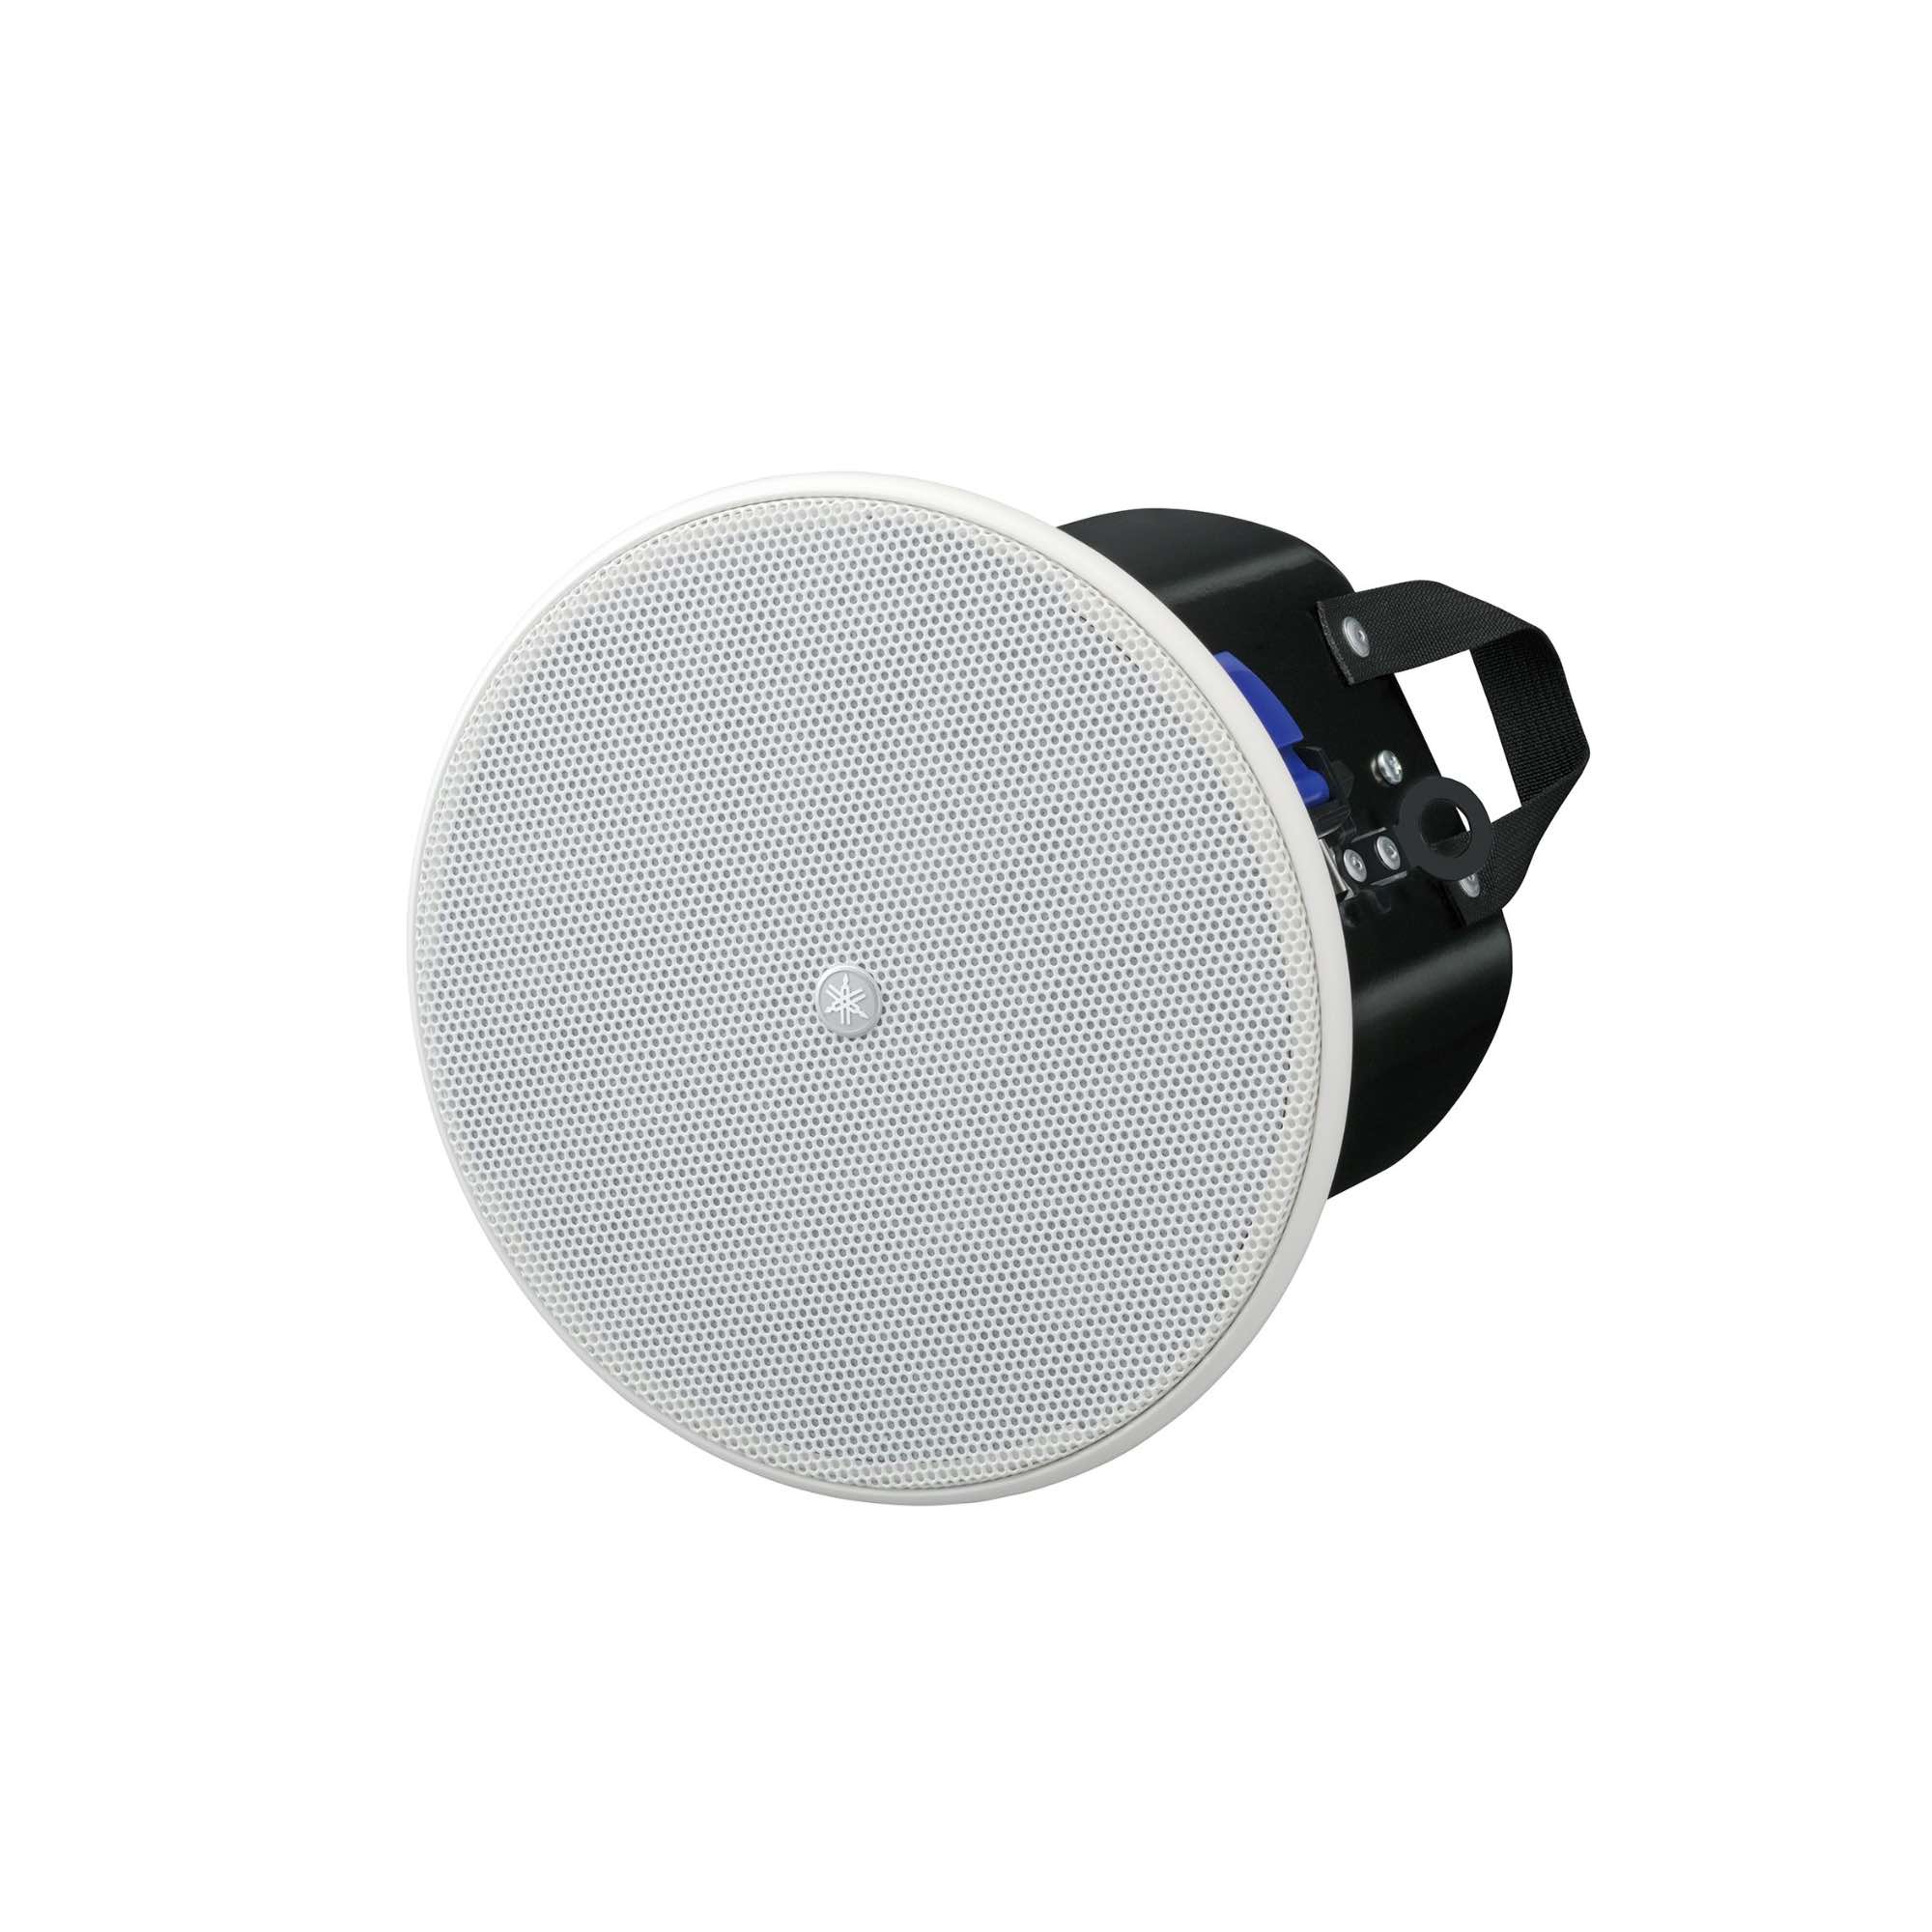 Speakers Products - Wholesale - Blackwire